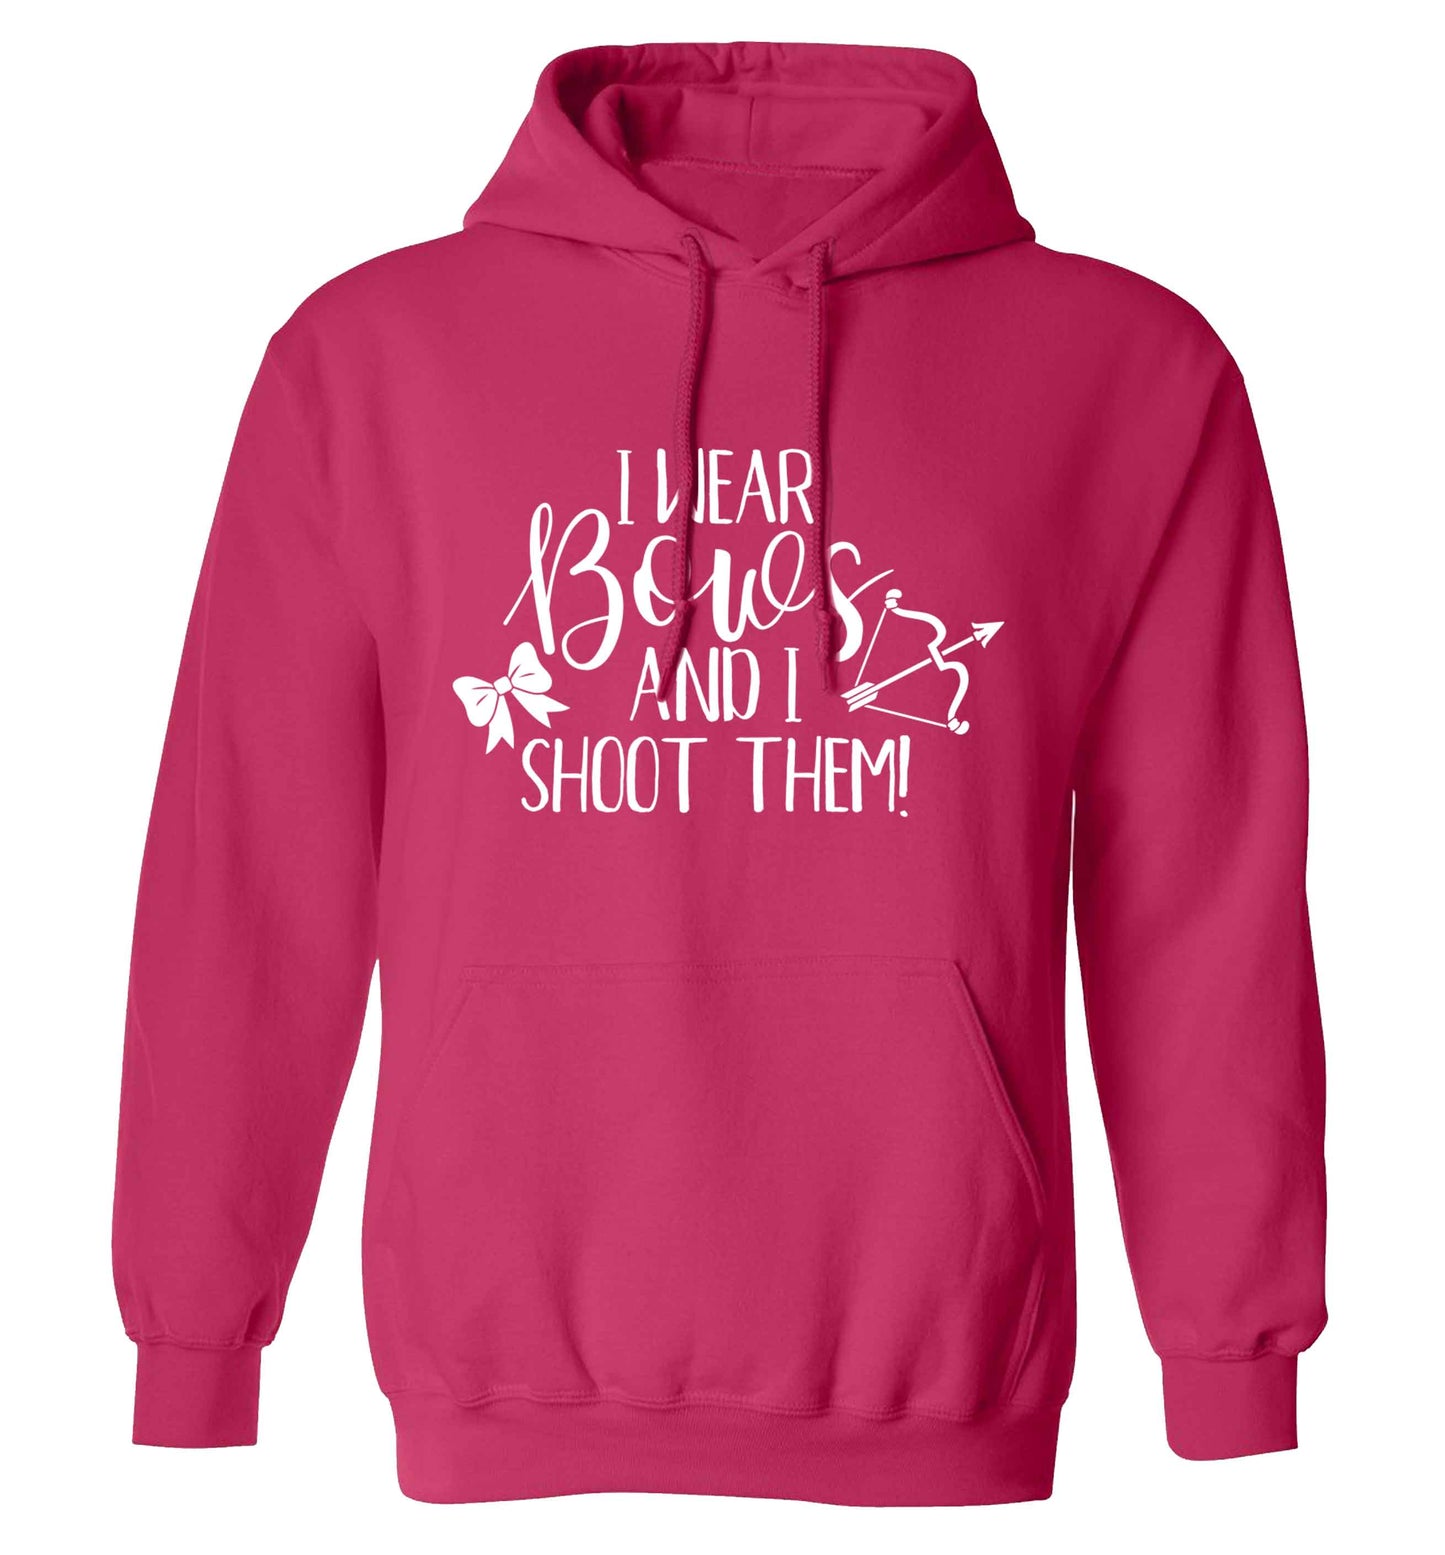 I wear bows and I shoot them adults unisex pink hoodie 2XL